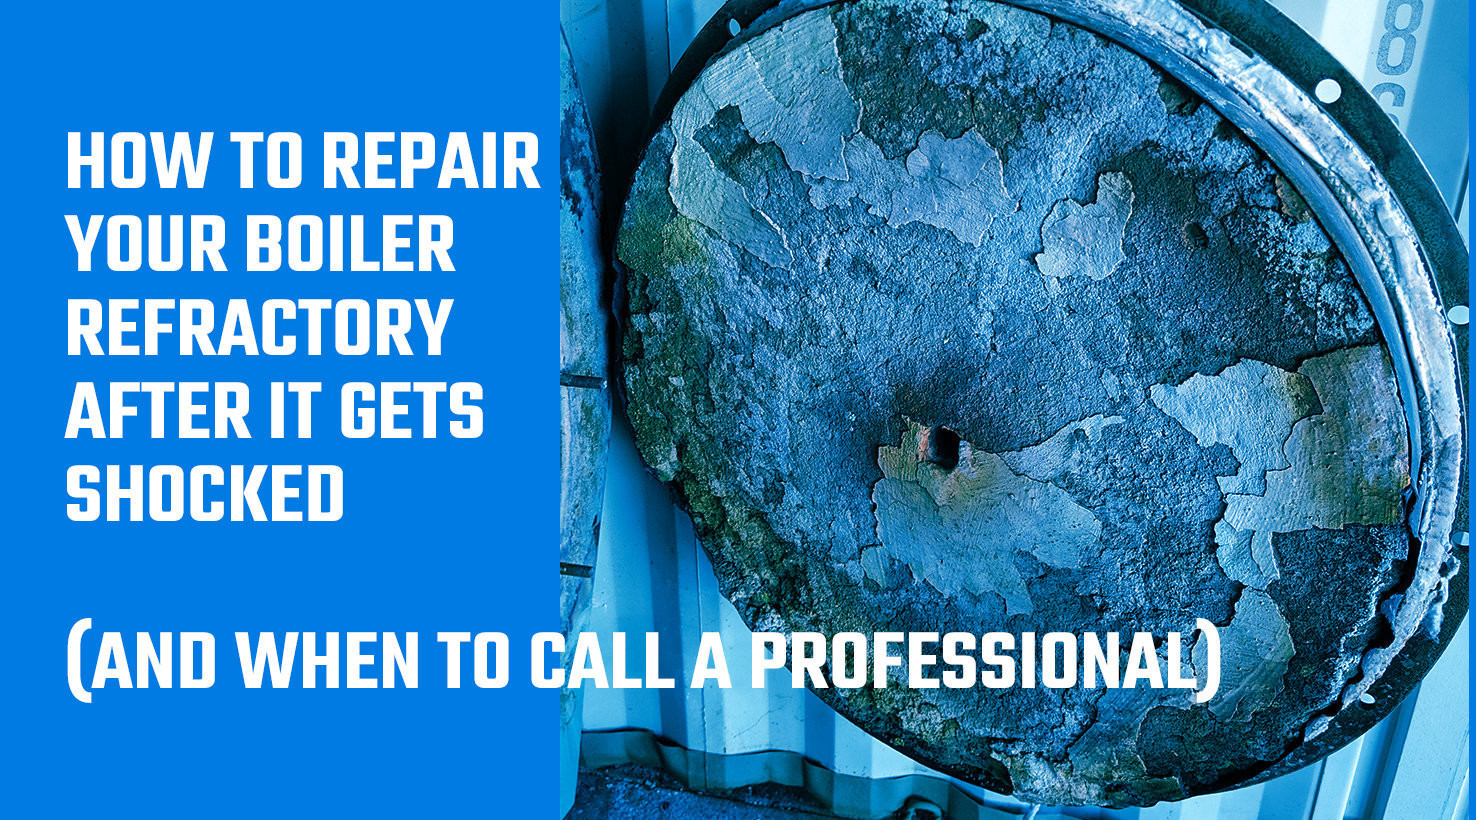 How to Repair Your Boiler Refractory After it Gets Shocked (And When to Call a Professional)